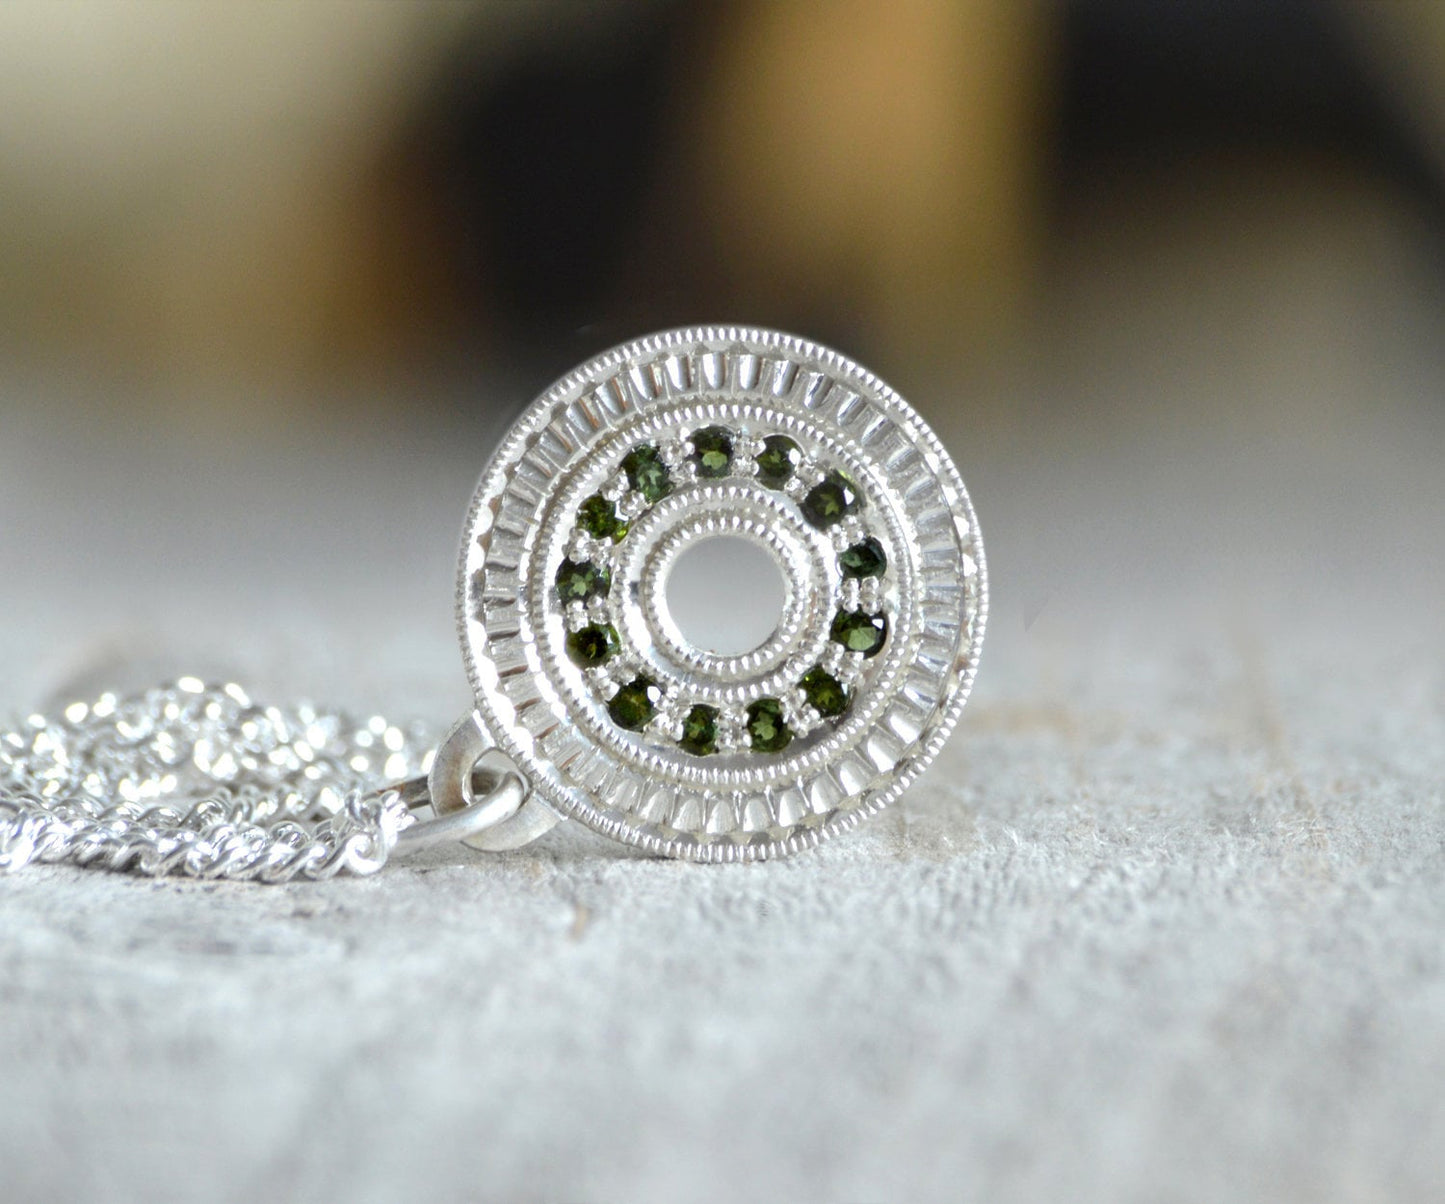 Eternity Green Tourmaline Necklace in Sterling Silver, Pave Tourmaline Necklace, October Birthstone Necklace